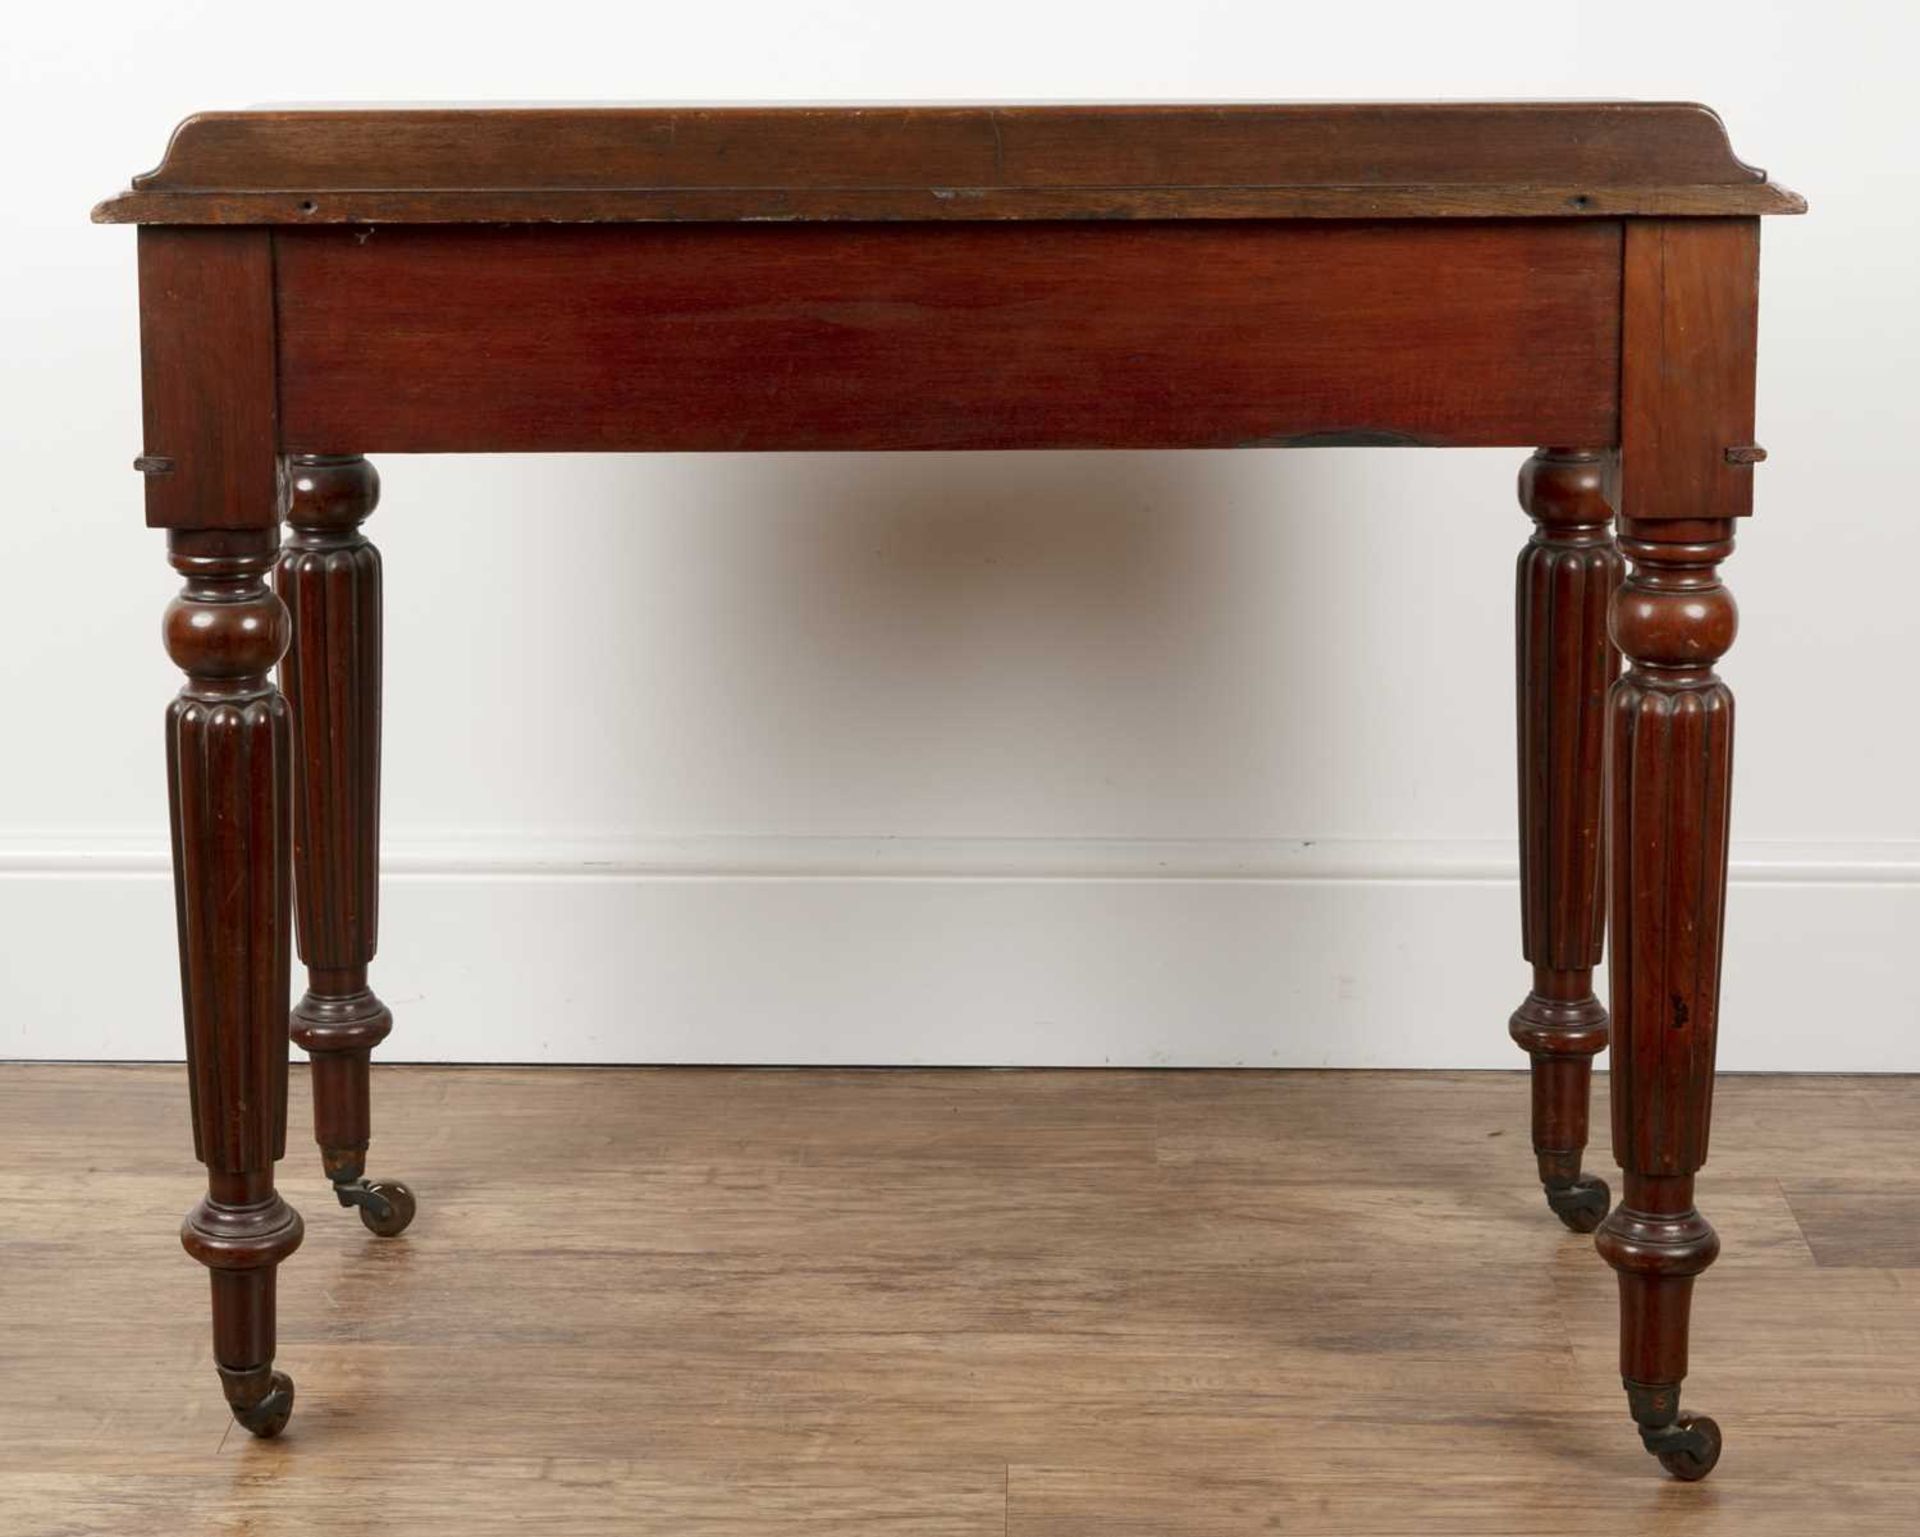 Mahogany side table Victorian, fitted two drawers, on reeded legs, 92cm wide x 51cm deep x 75cm high - Image 4 of 5